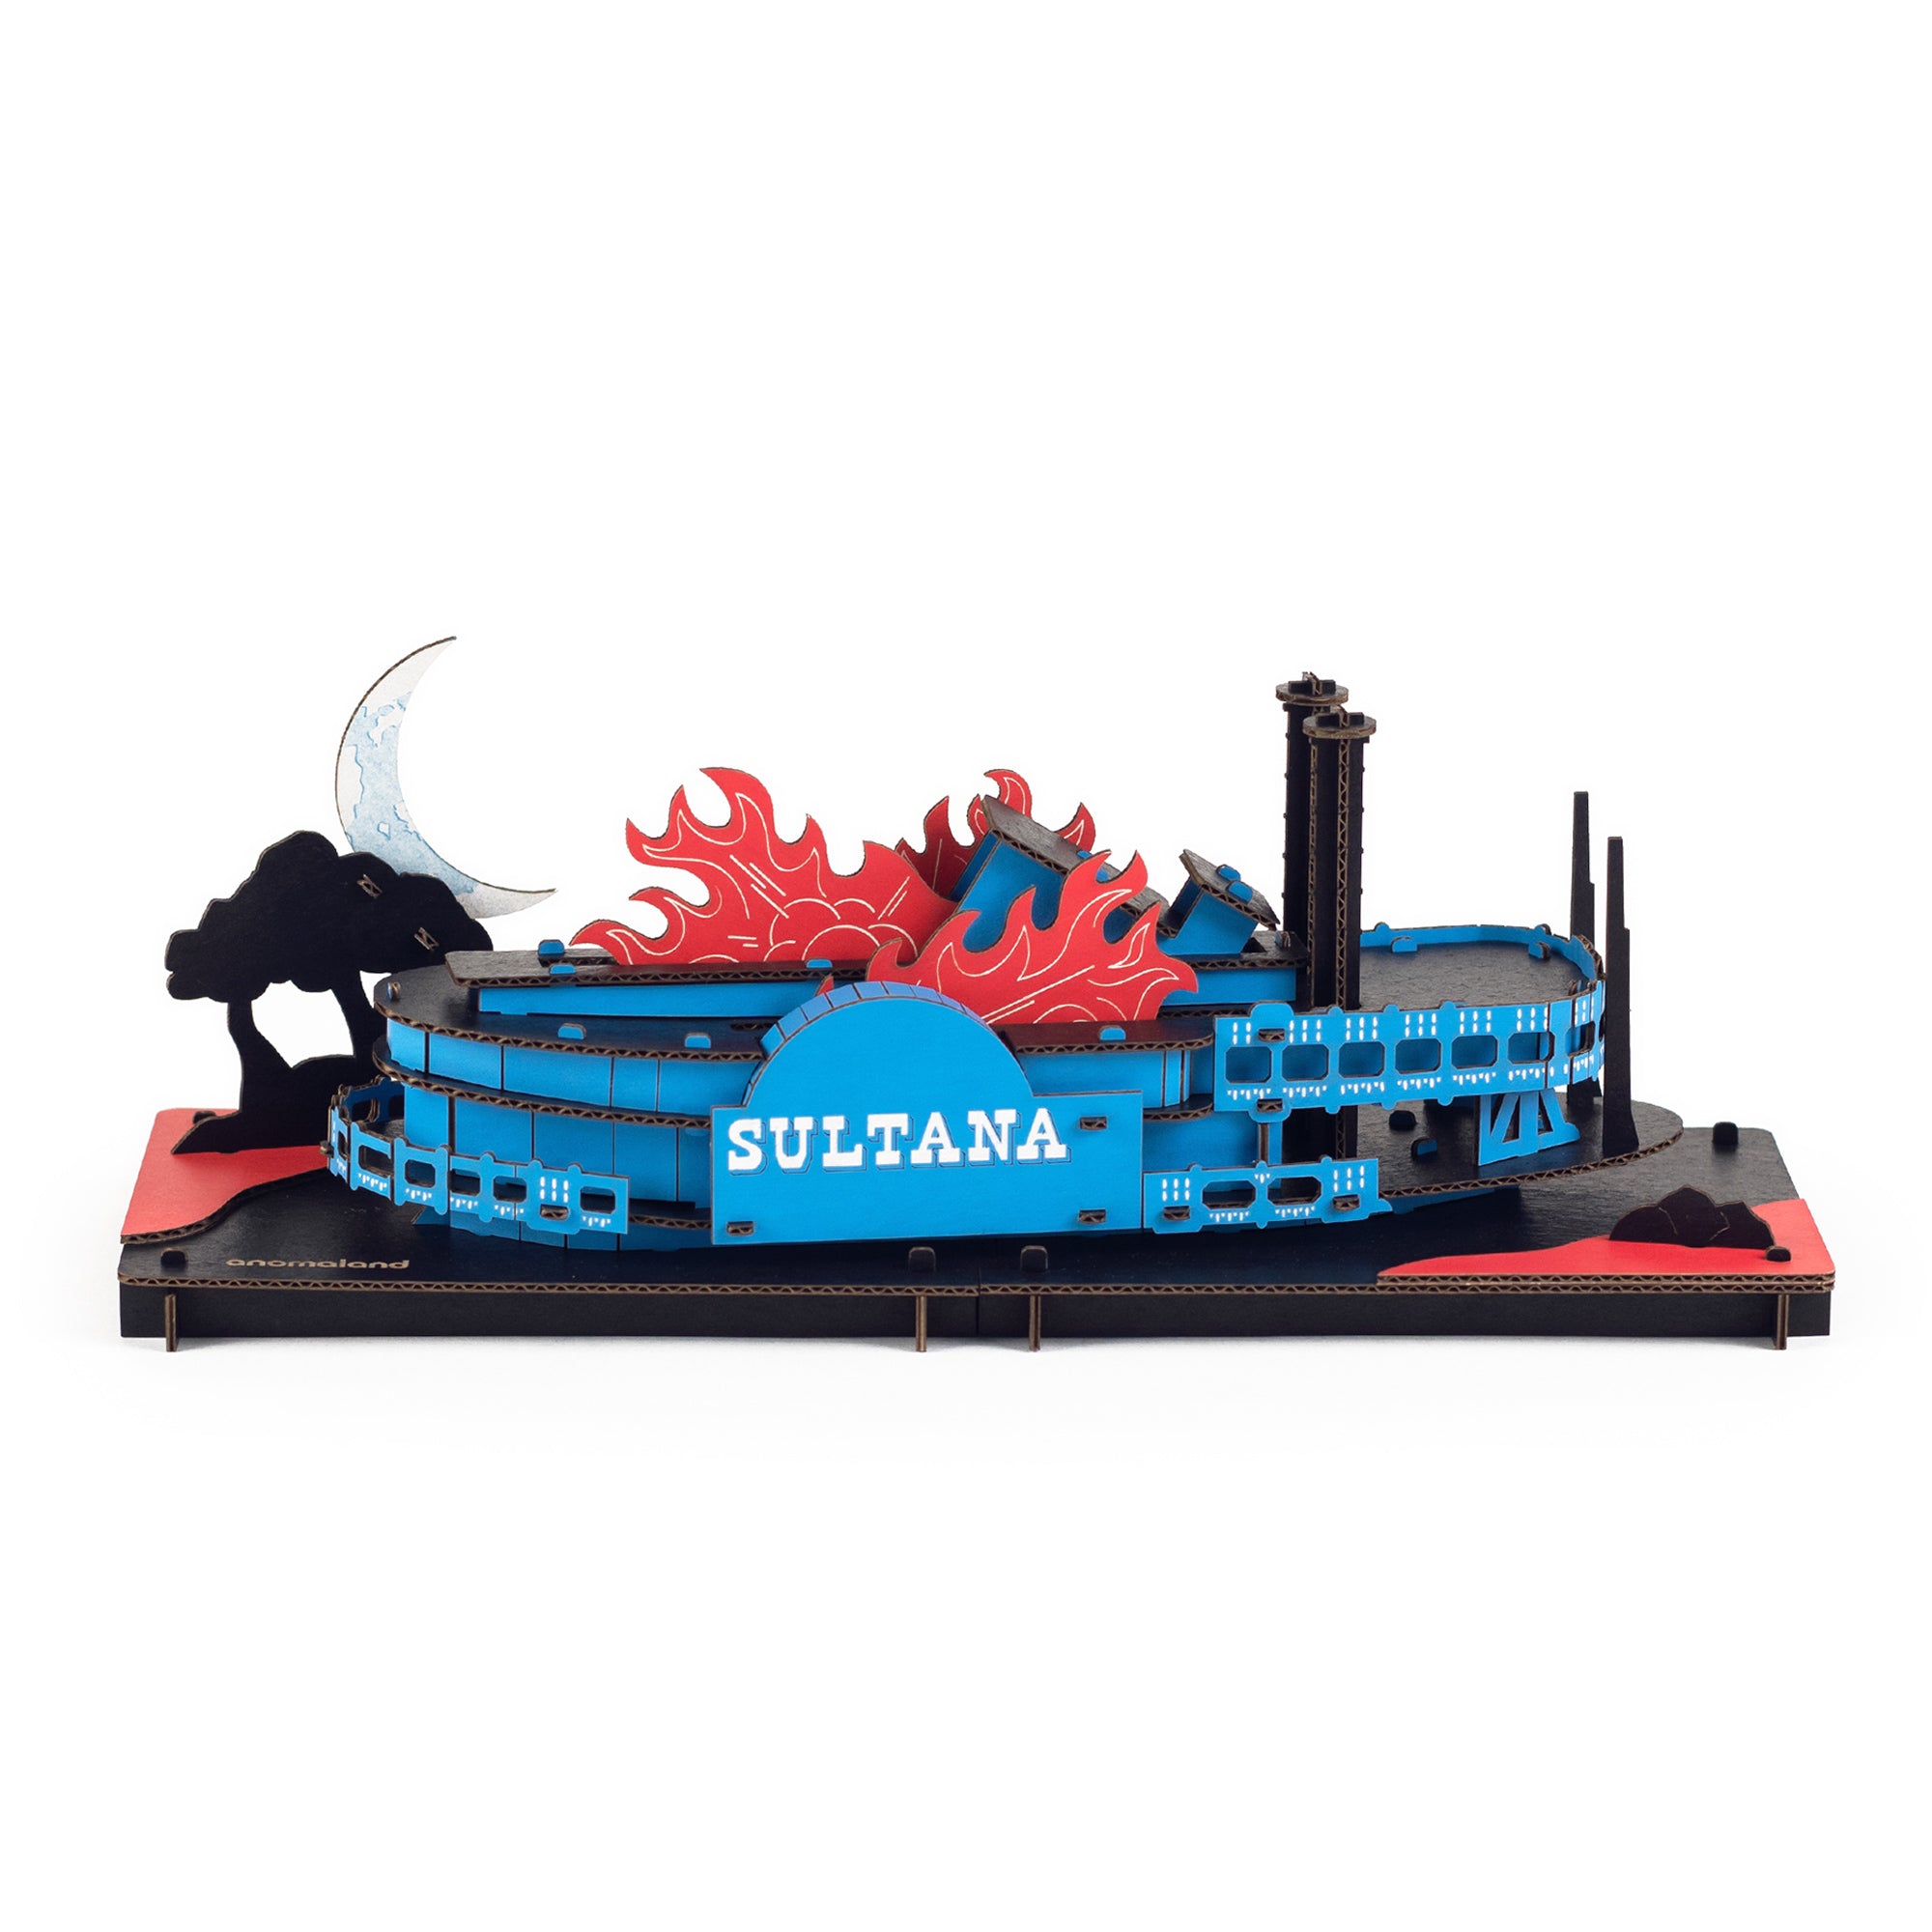 Anomaland Sultana Steamboat Disaster Model Kit showing the starboard paddlebox in front of exploding flames